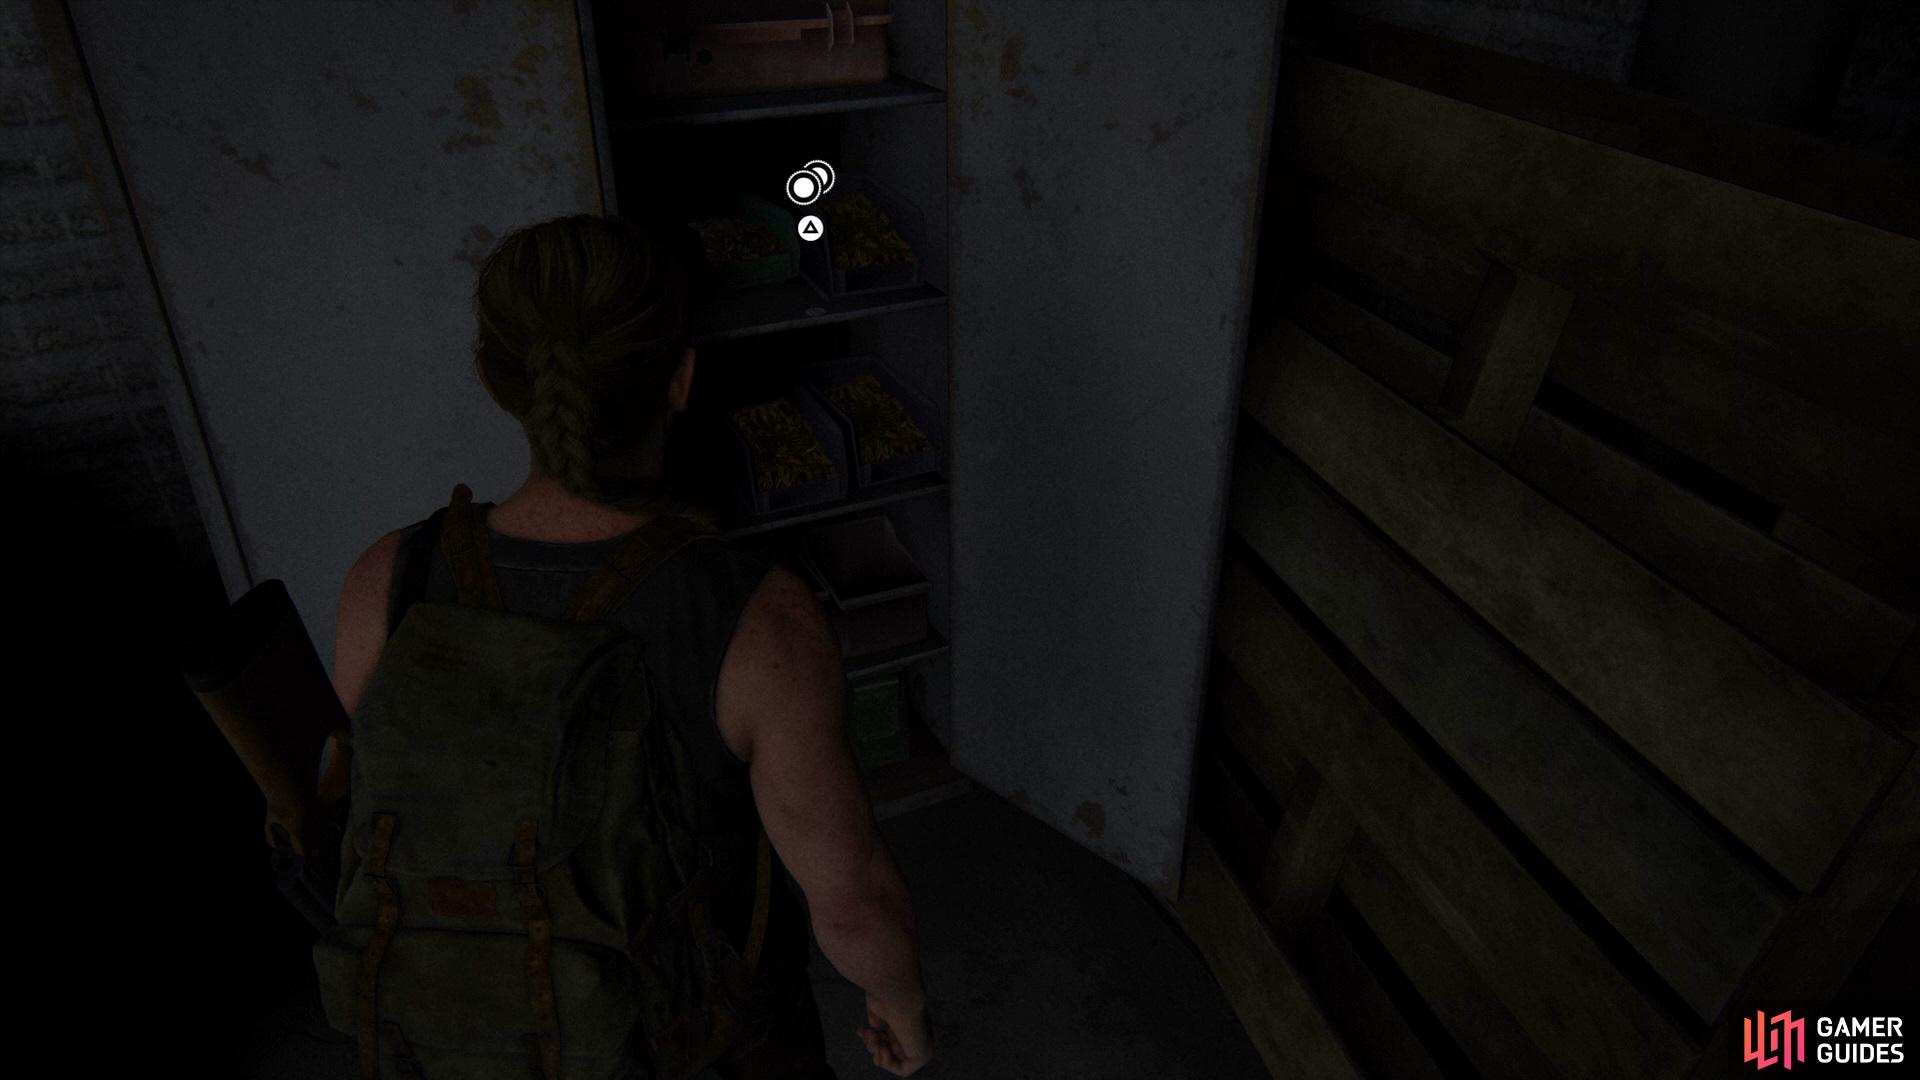 then take a left when you reach garage to find another Coin in a locker. 